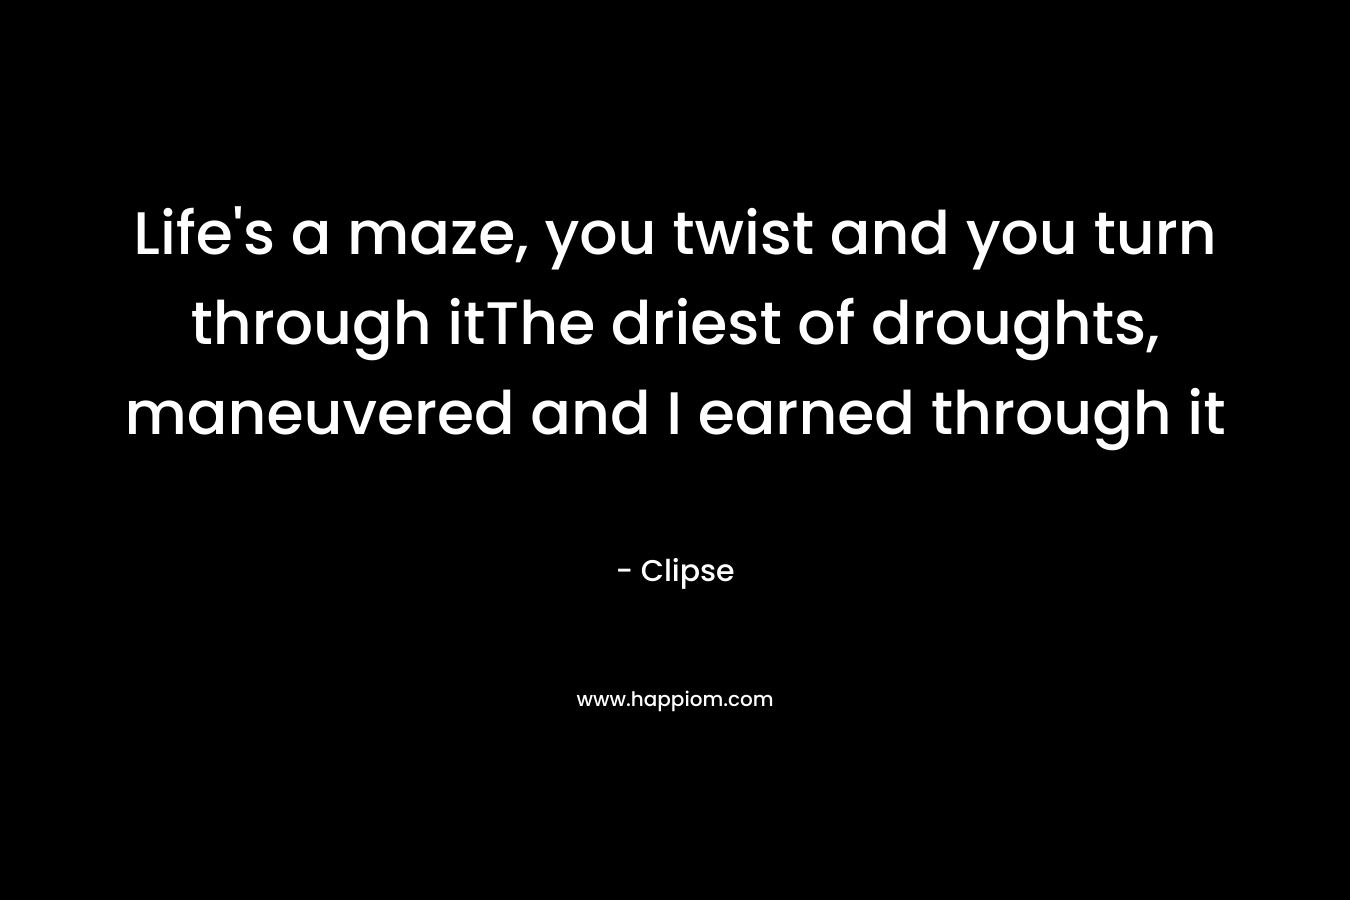 Life's a maze, you twist and you turn through itThe driest of droughts, maneuvered and I earned through it